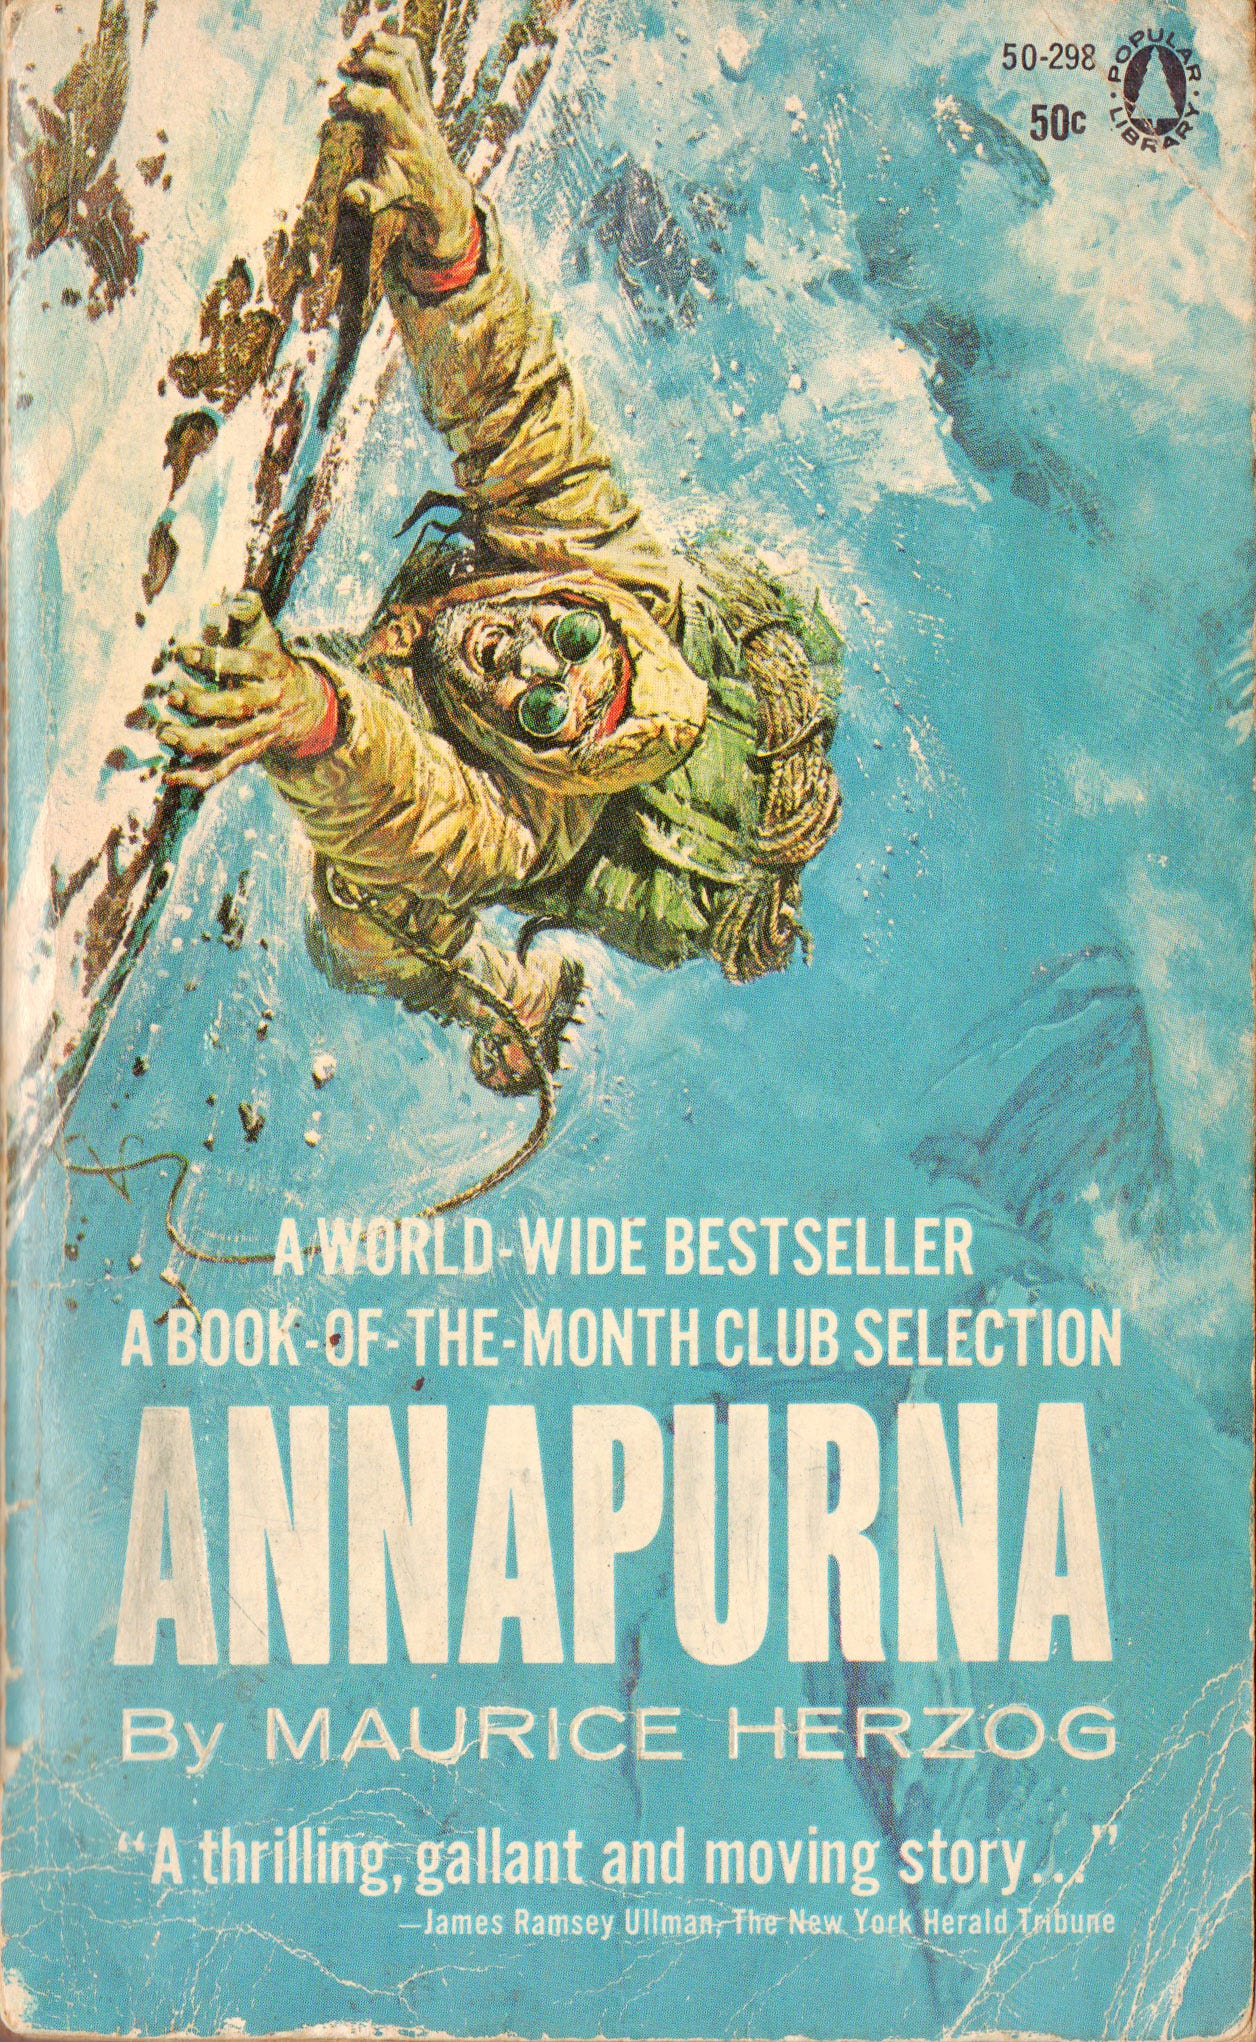 The contrasting cover of the US paperback edition of Annapurna’s expedition book (artist unknown)